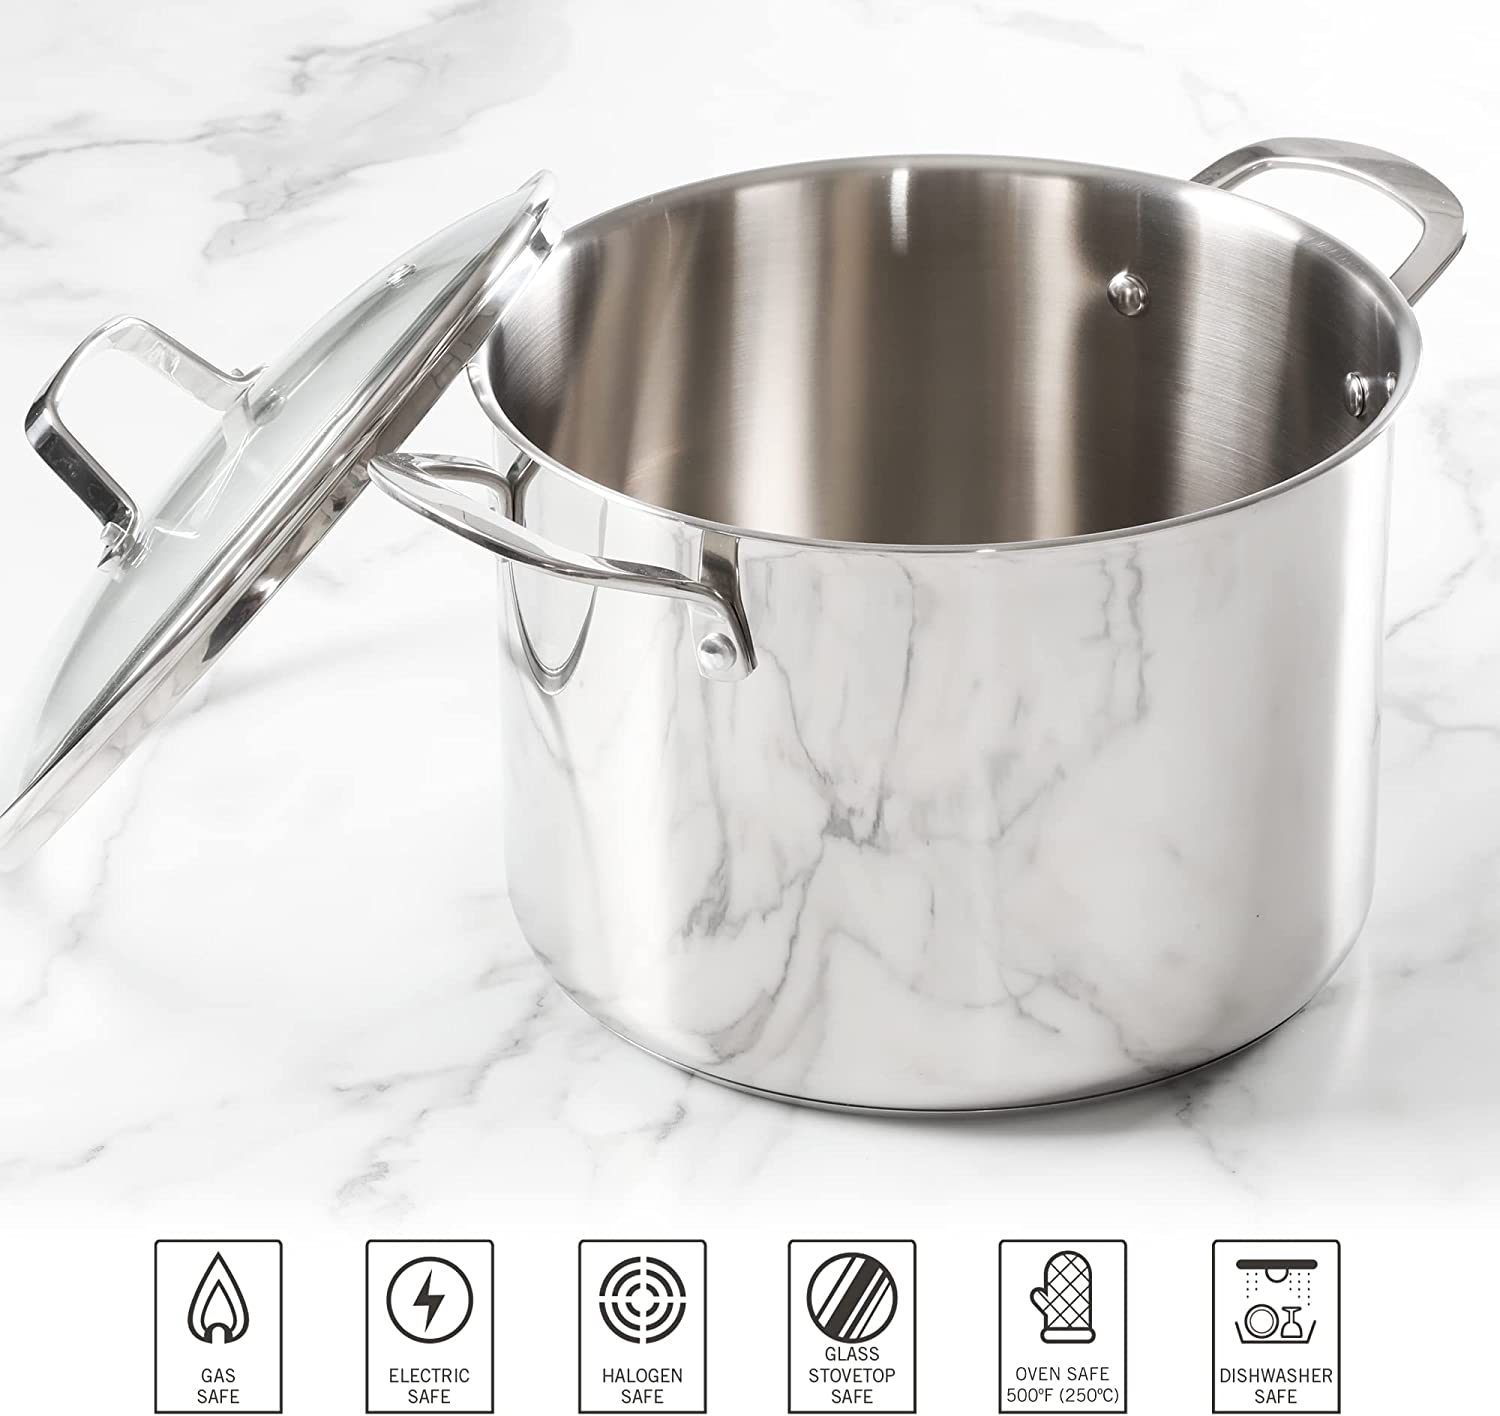 Easy-Release Hard Anodized 6-Quart Stock Pot | Cuisipro